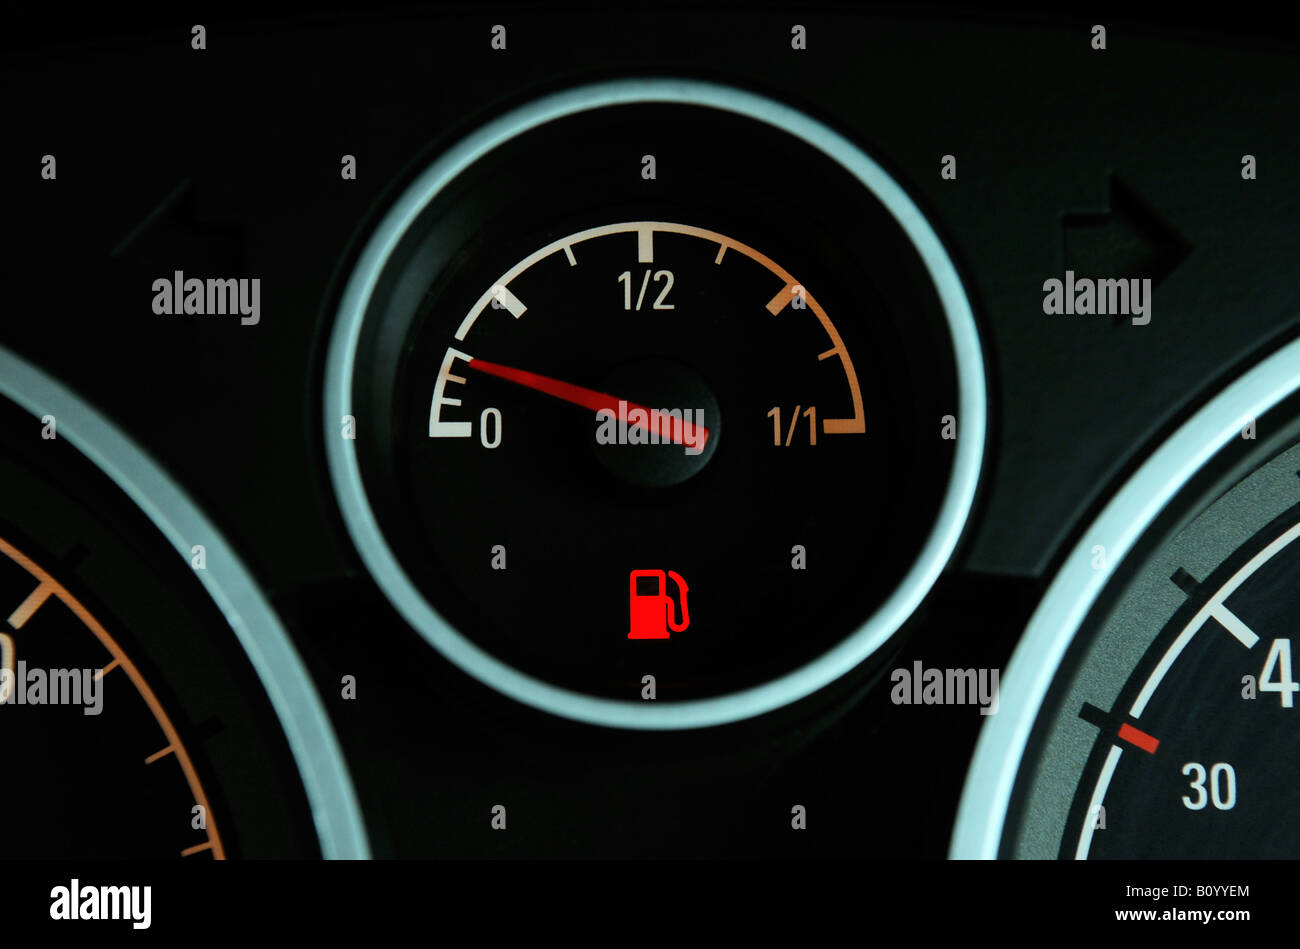 A BRITISH CAR FUEL GAUGE SHOWING LOW FUEL WITH RED WARNING LIGHT,UK. Stock Photo